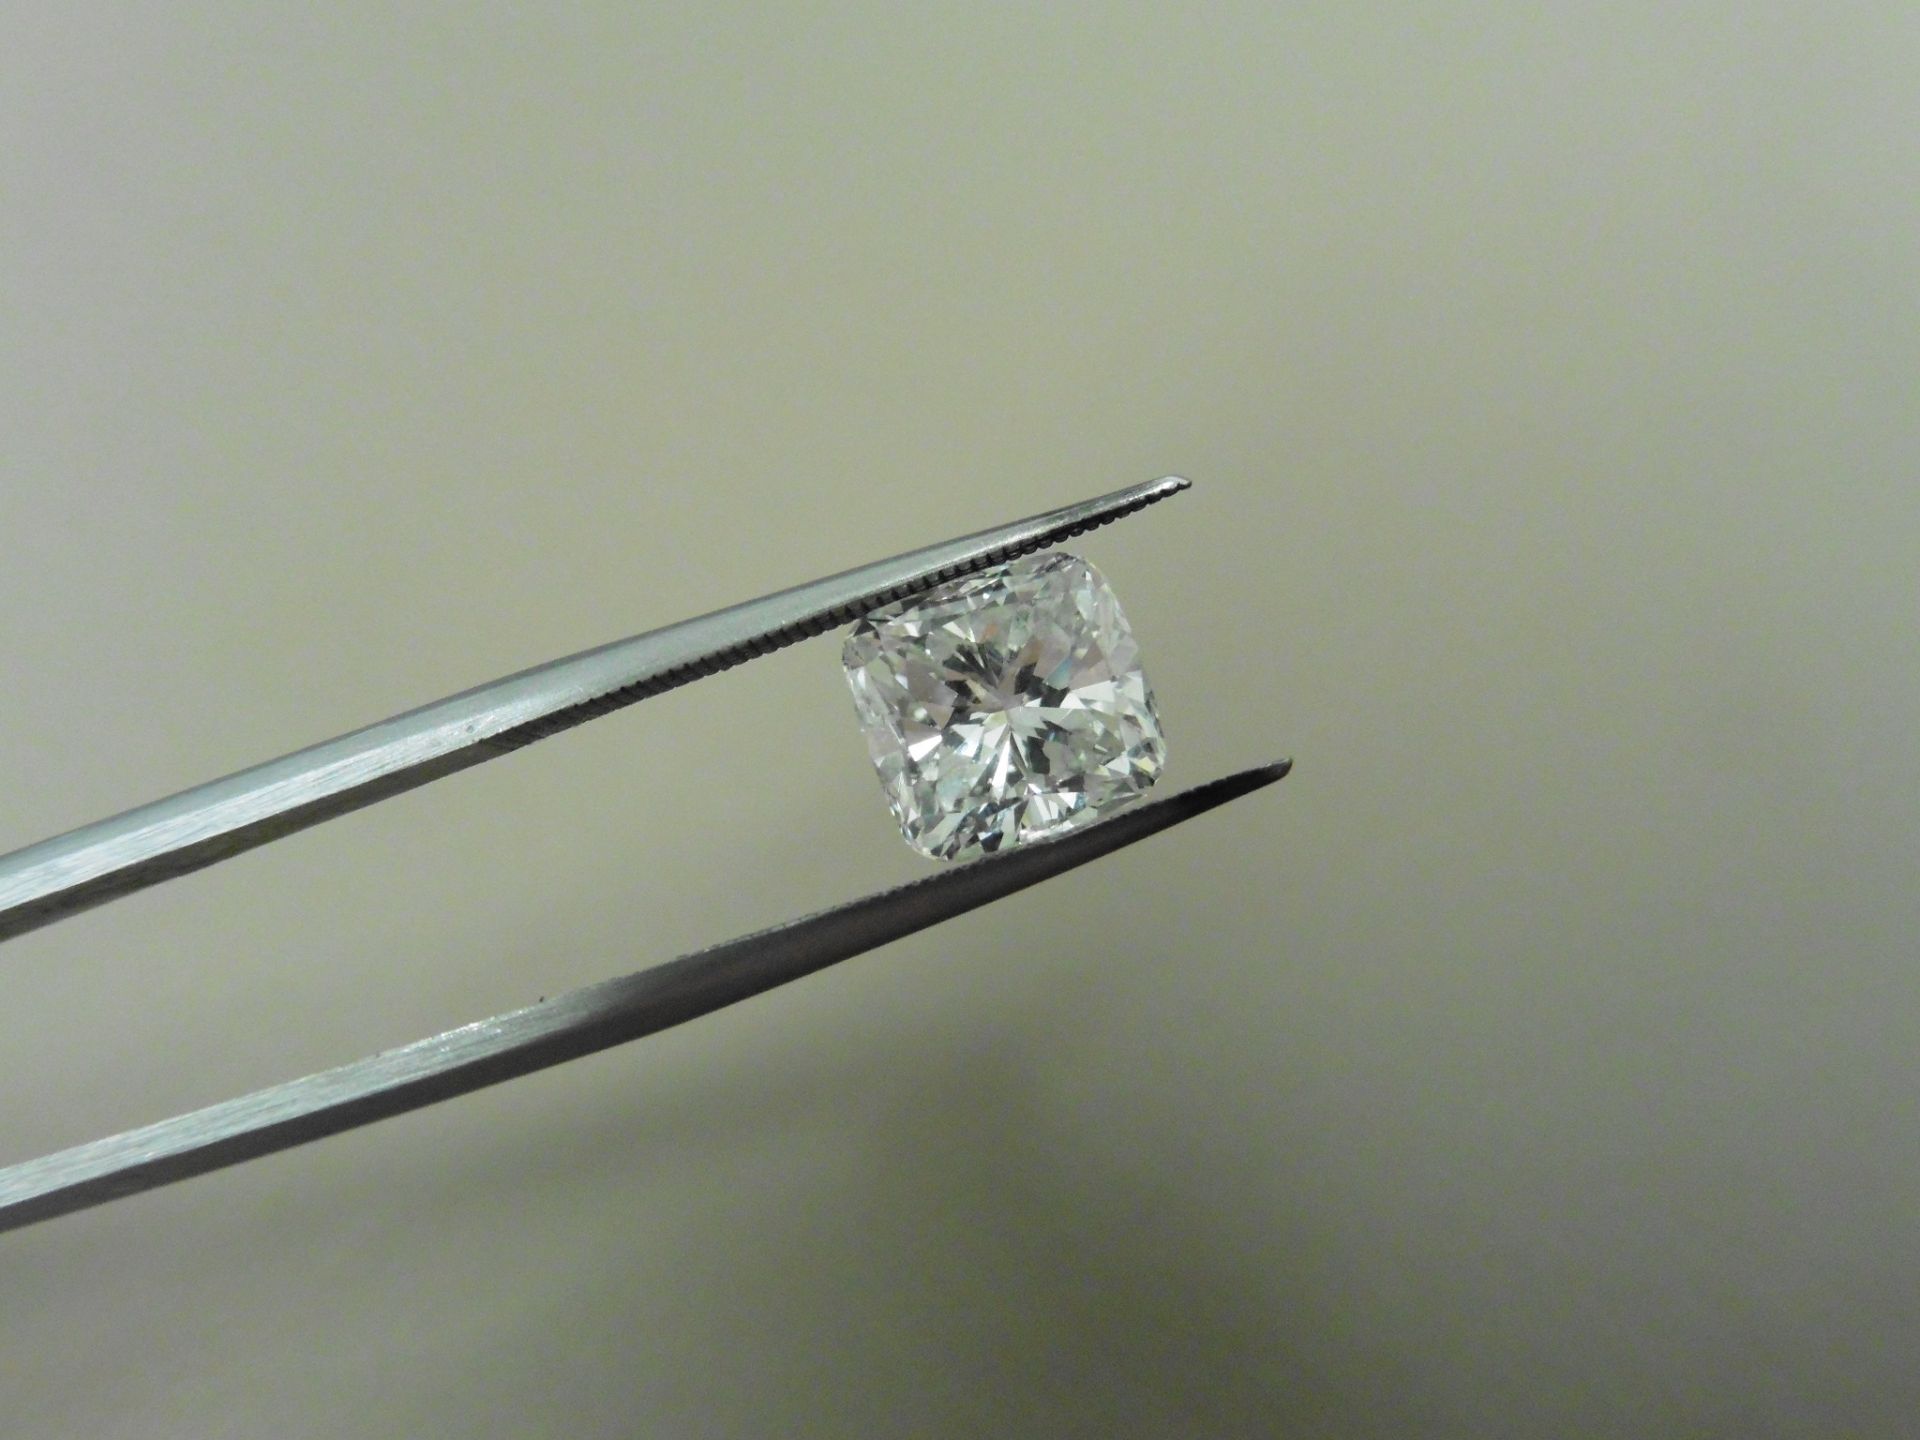 1.71ct natural cushion cut diamond. F colour and VS2 clarity. GIA certification. Valued at £33000